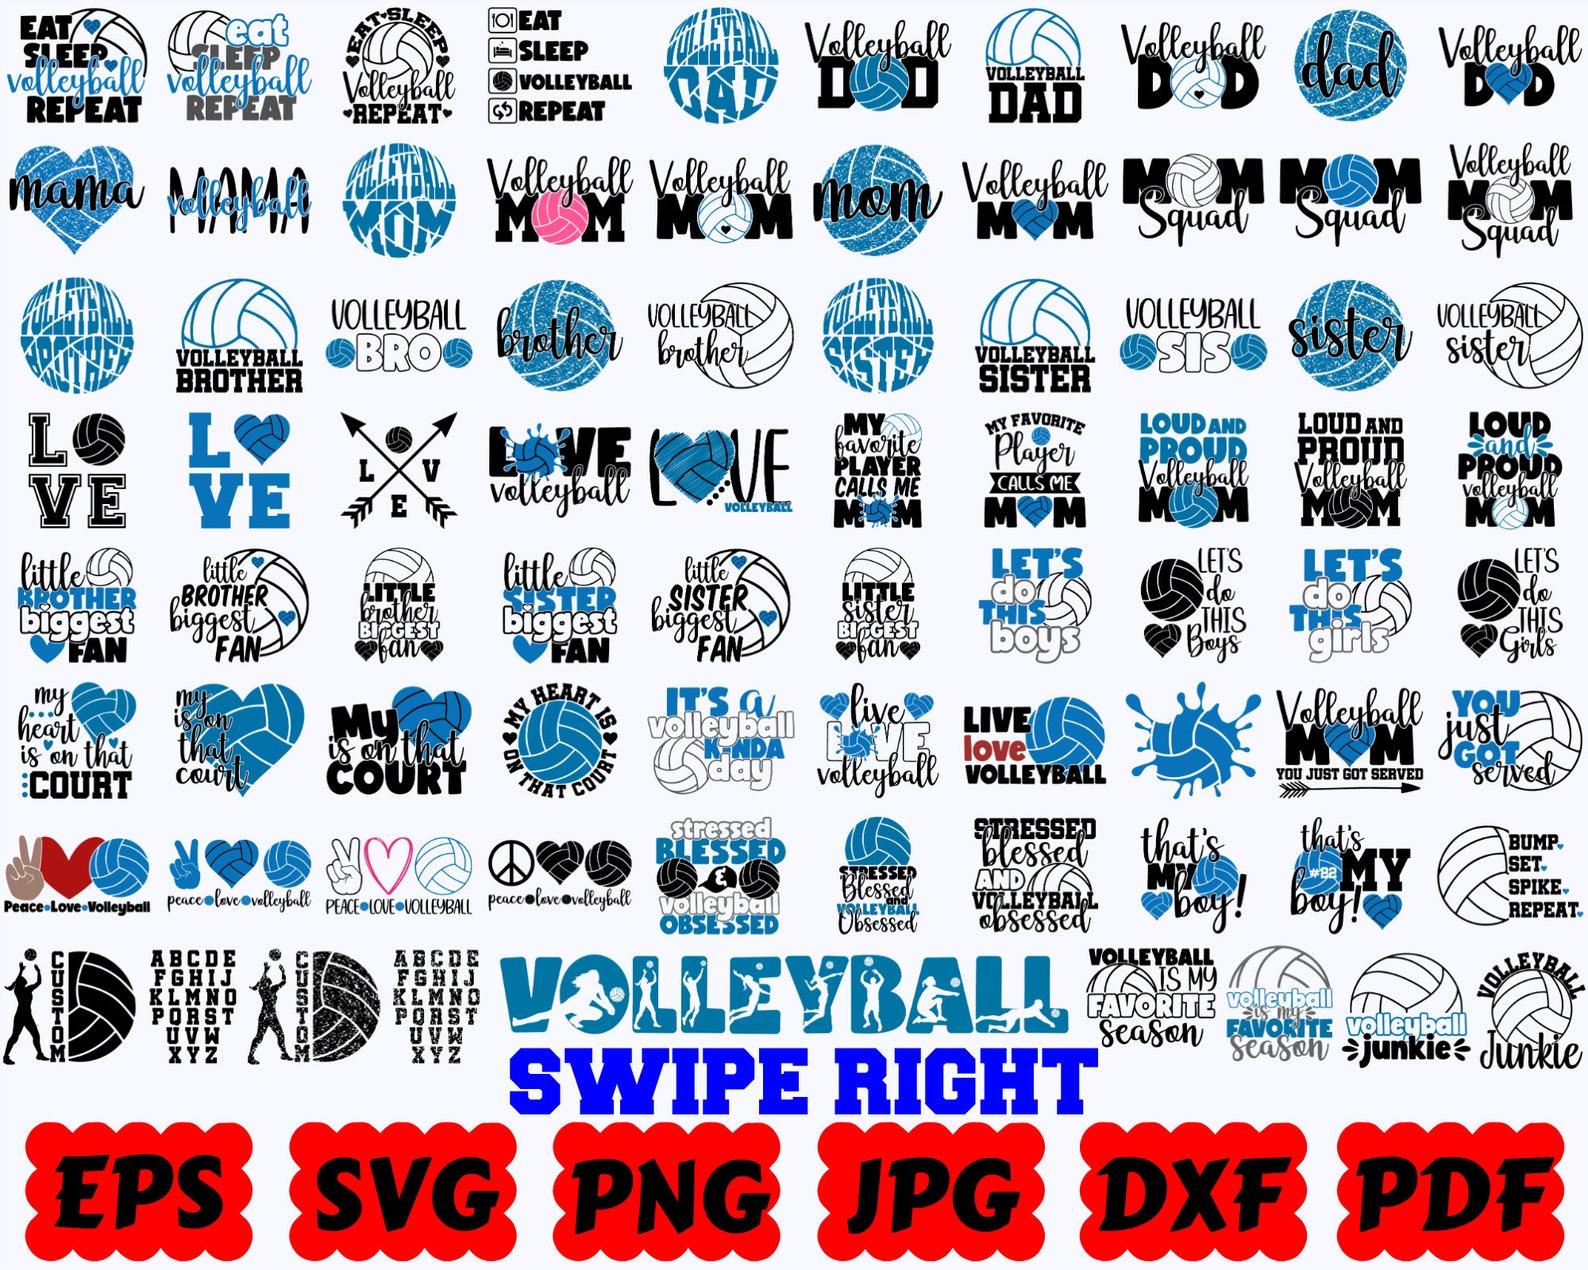 Diverse of volleyball elements.